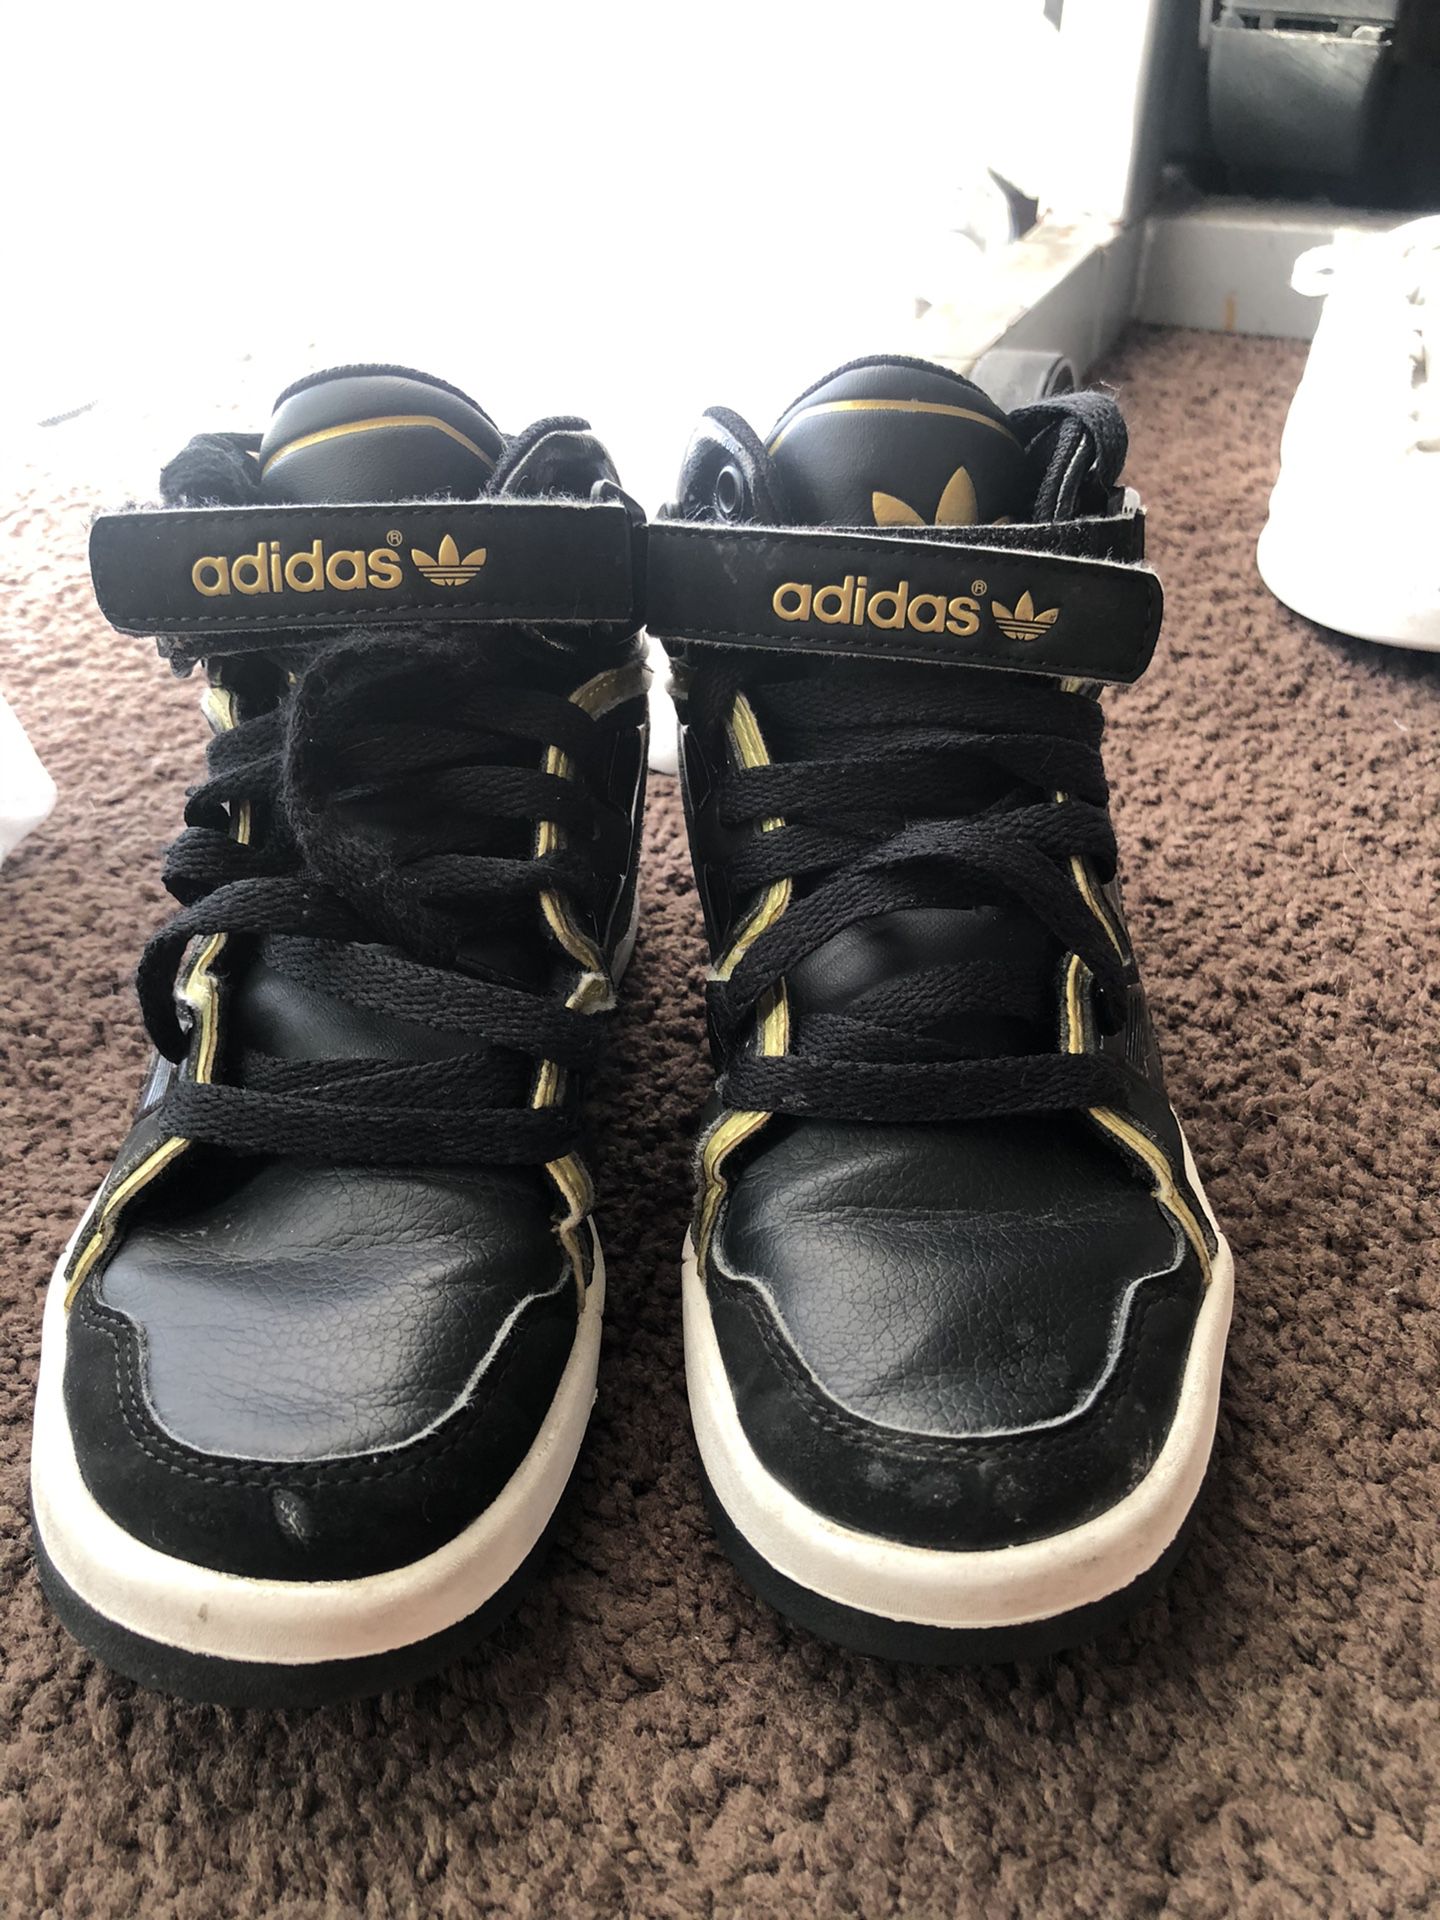 Adidas black and gold 1y, pick up only